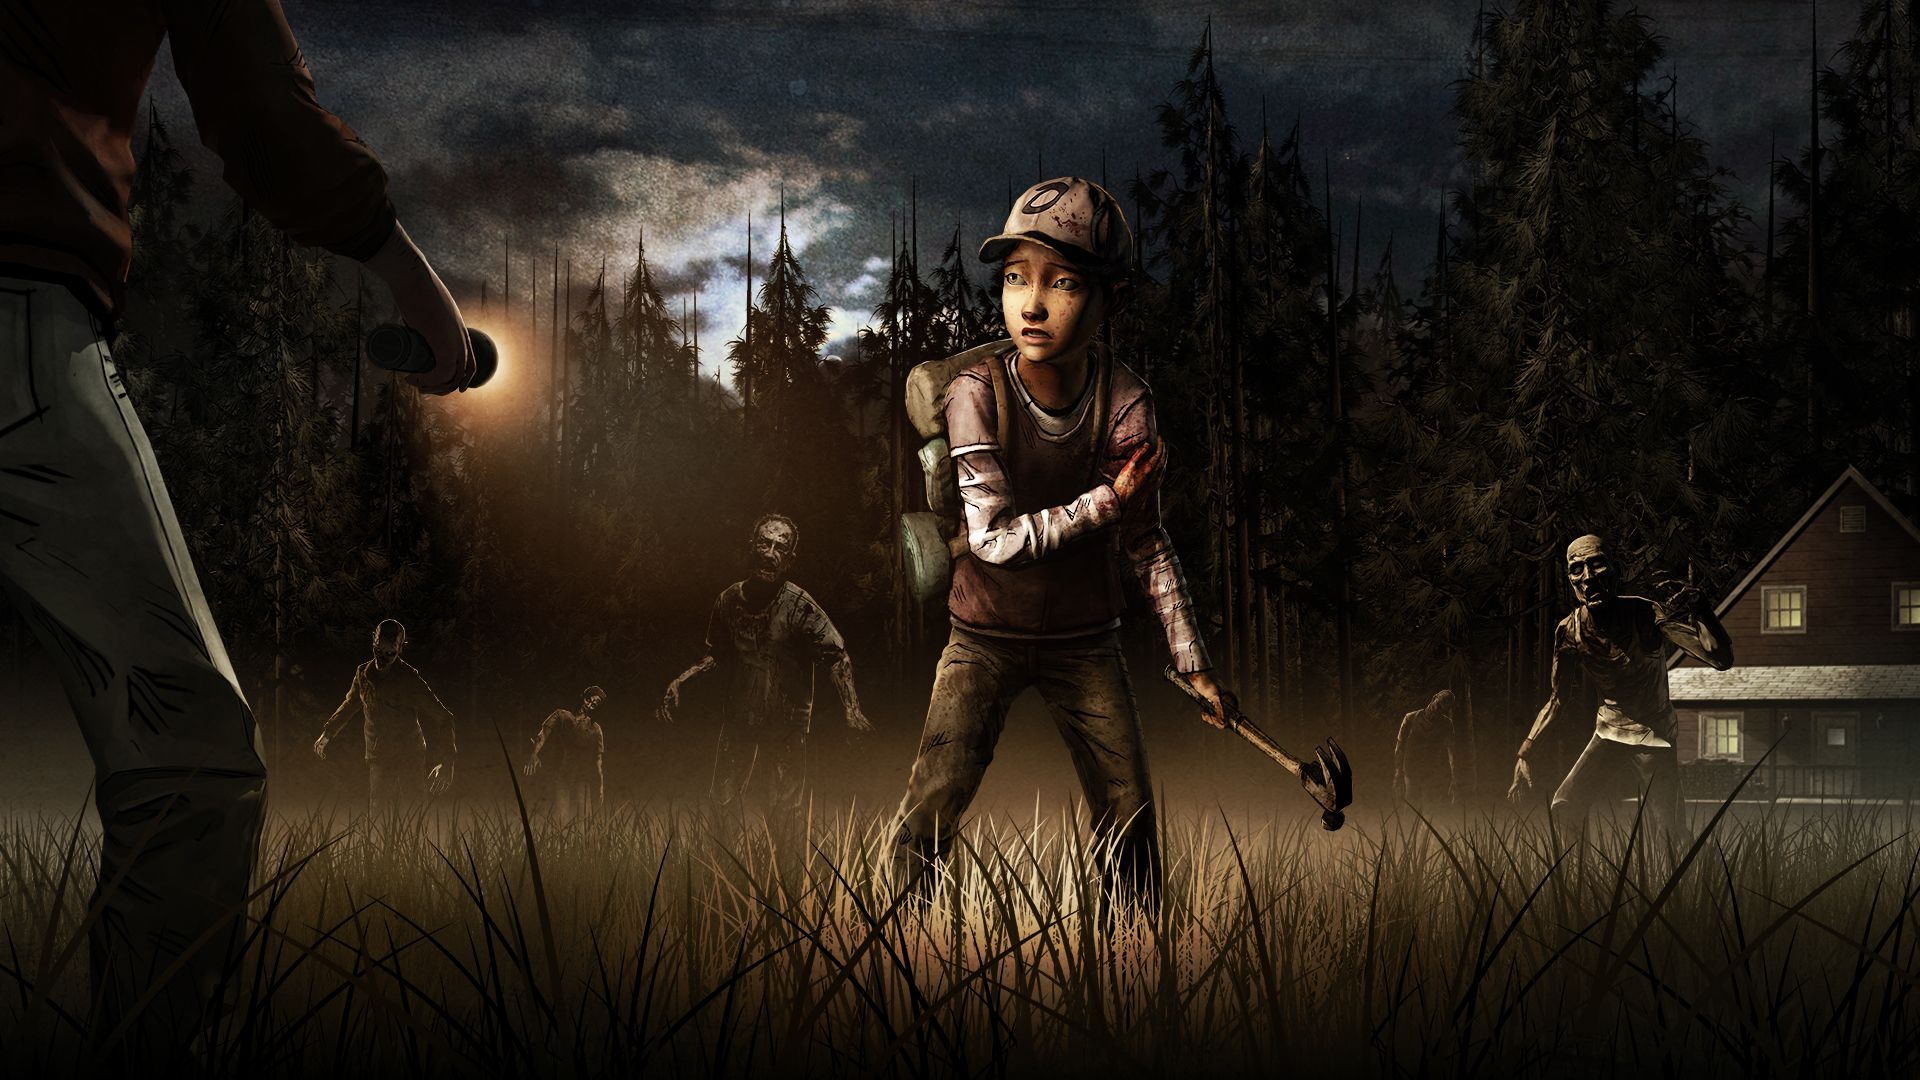 17 The Walking Dead HD Wallpapers Backgrounds - Wallpaper Abyss